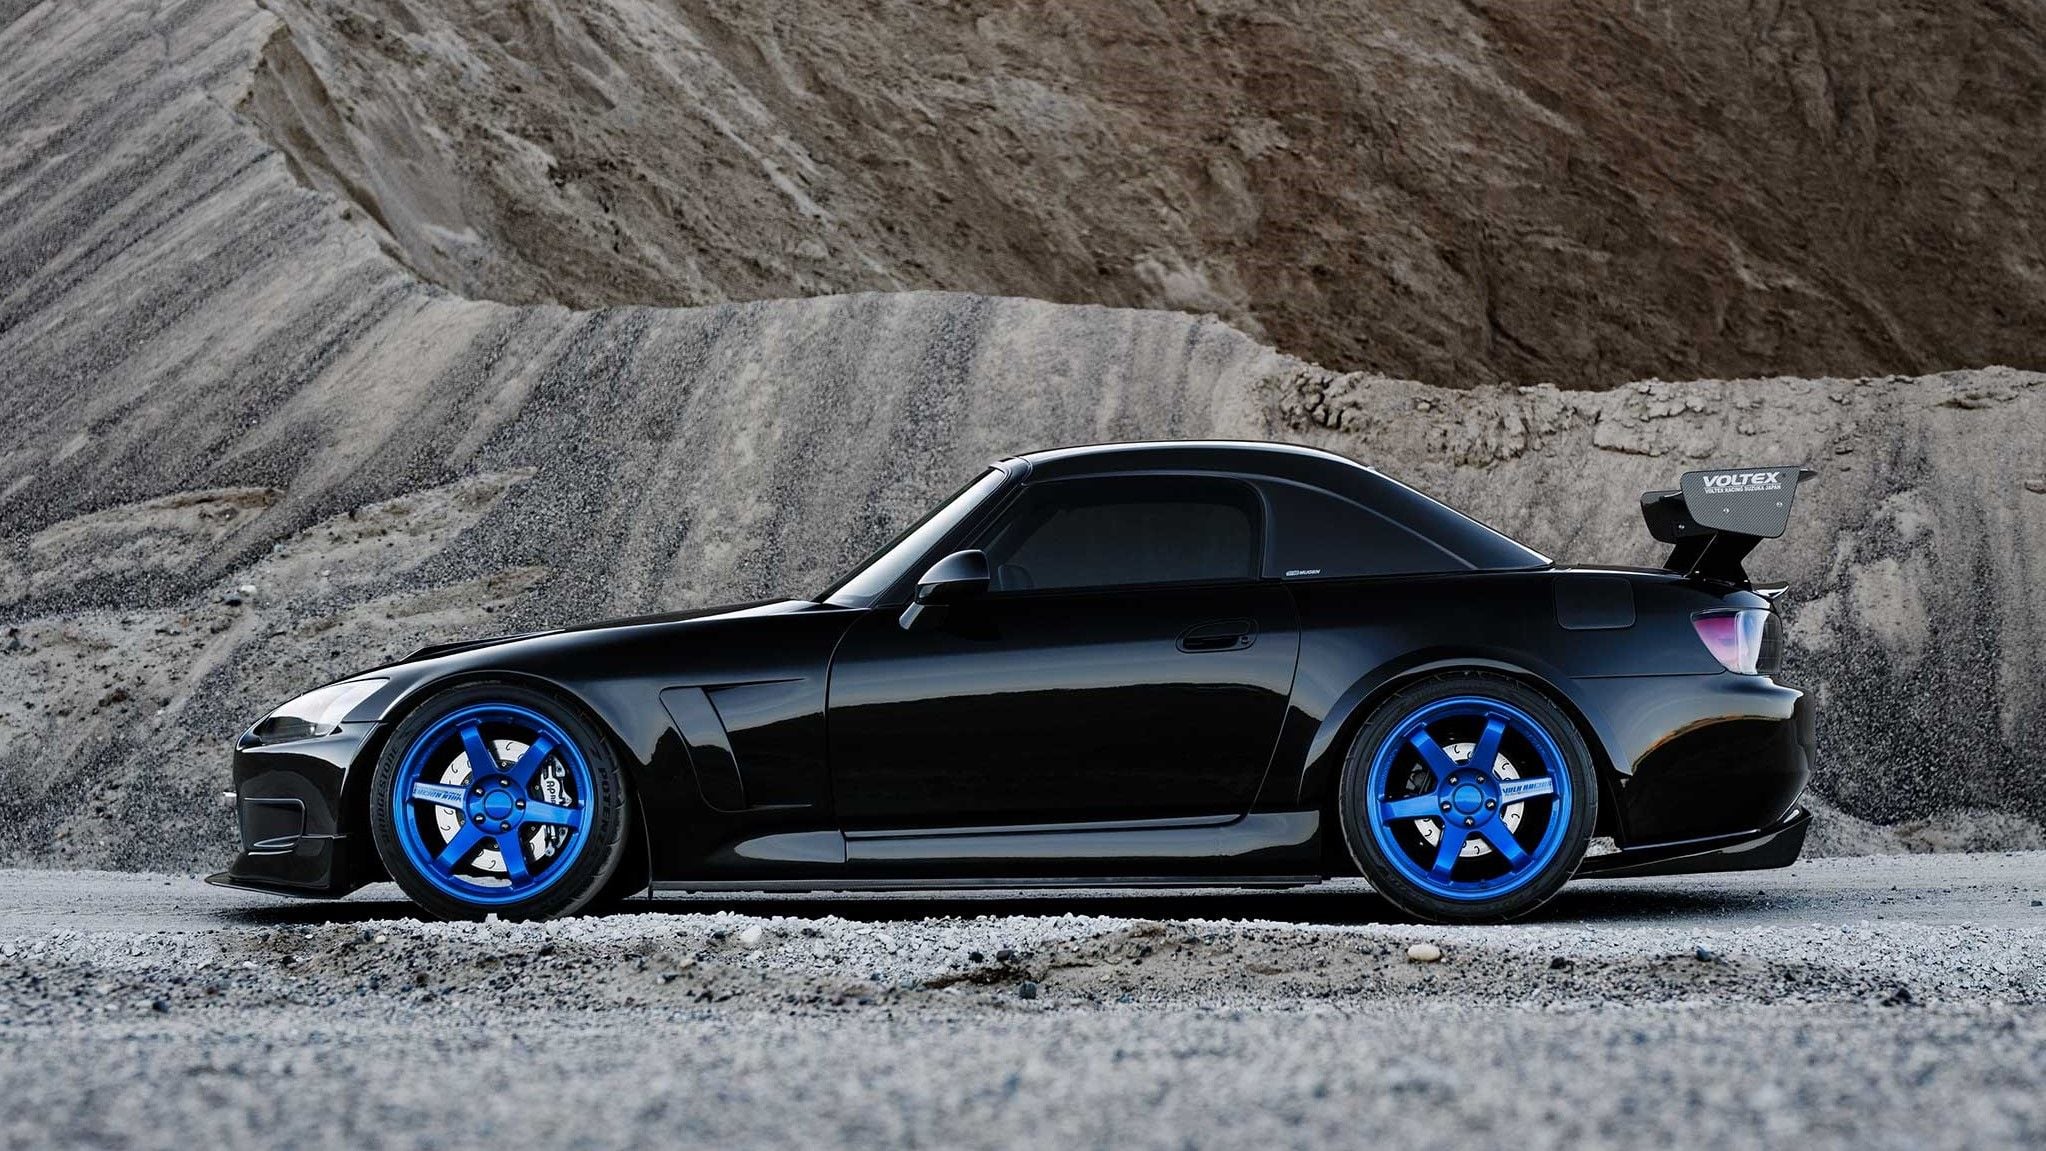 Honda S2000 Rendering Reminds Us Just How Much We Miss This Car - Honda-Tech